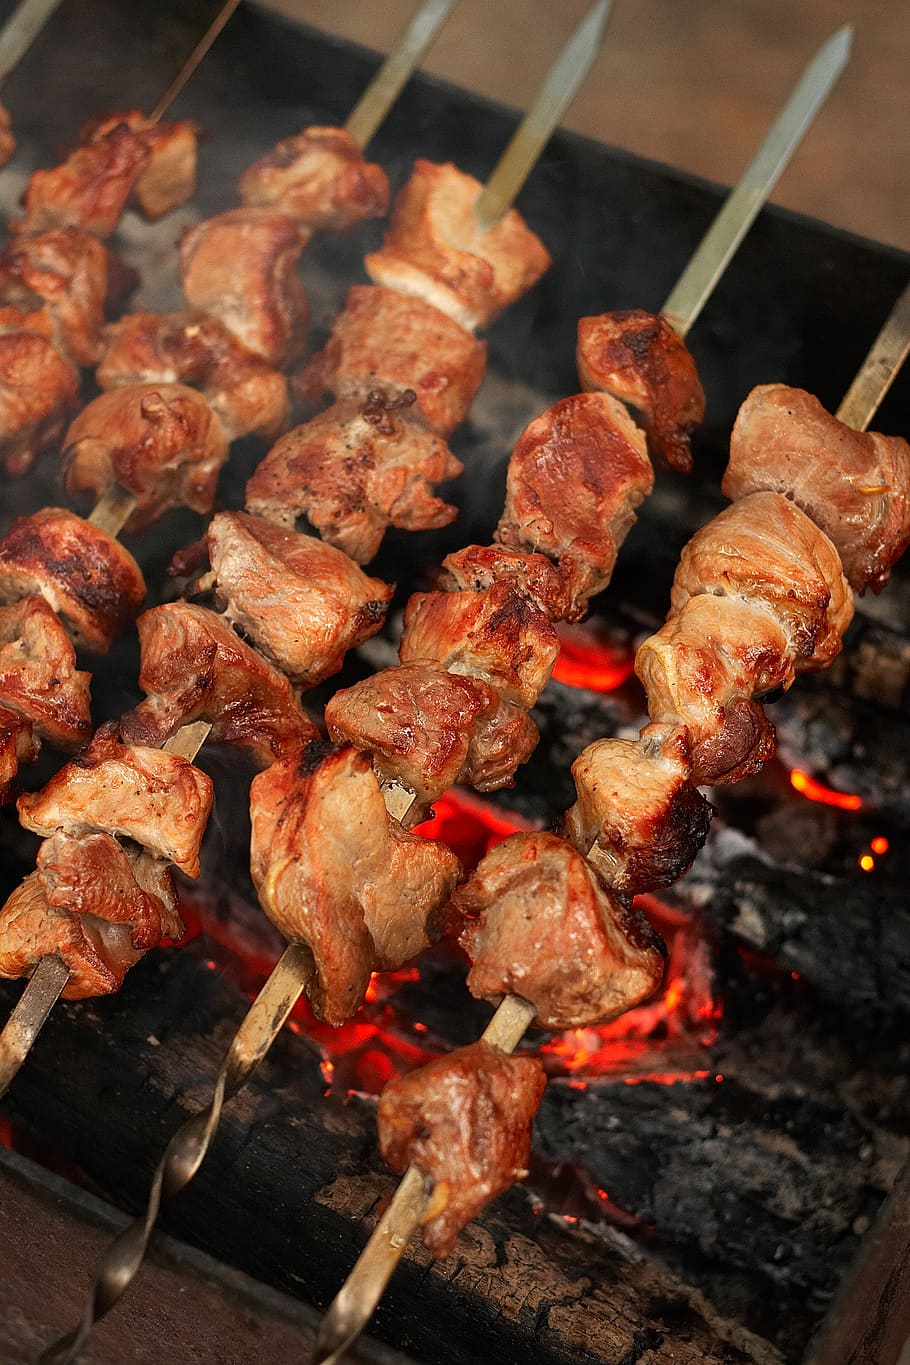 grilled barbecues, food, picnic, shish kebab, meat, mangal, fried meat, frying, coals, on the nature